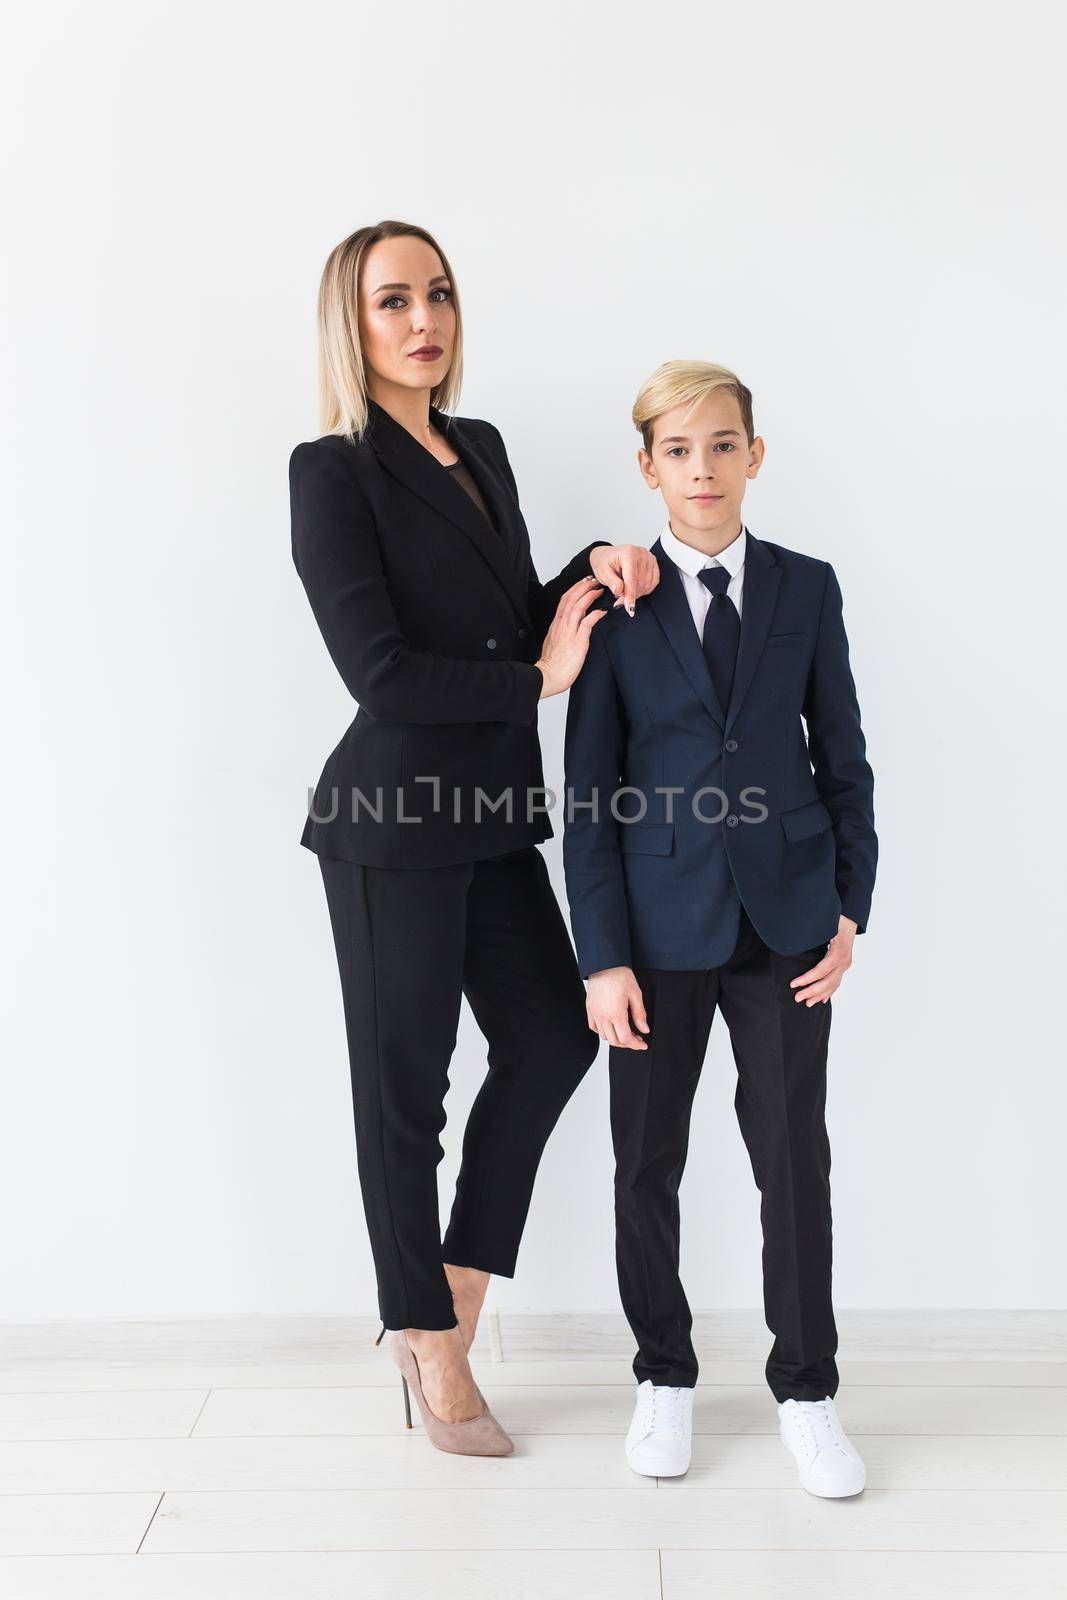 Parenting, family and single parent concept - A happy mother and teen son smiling on white.